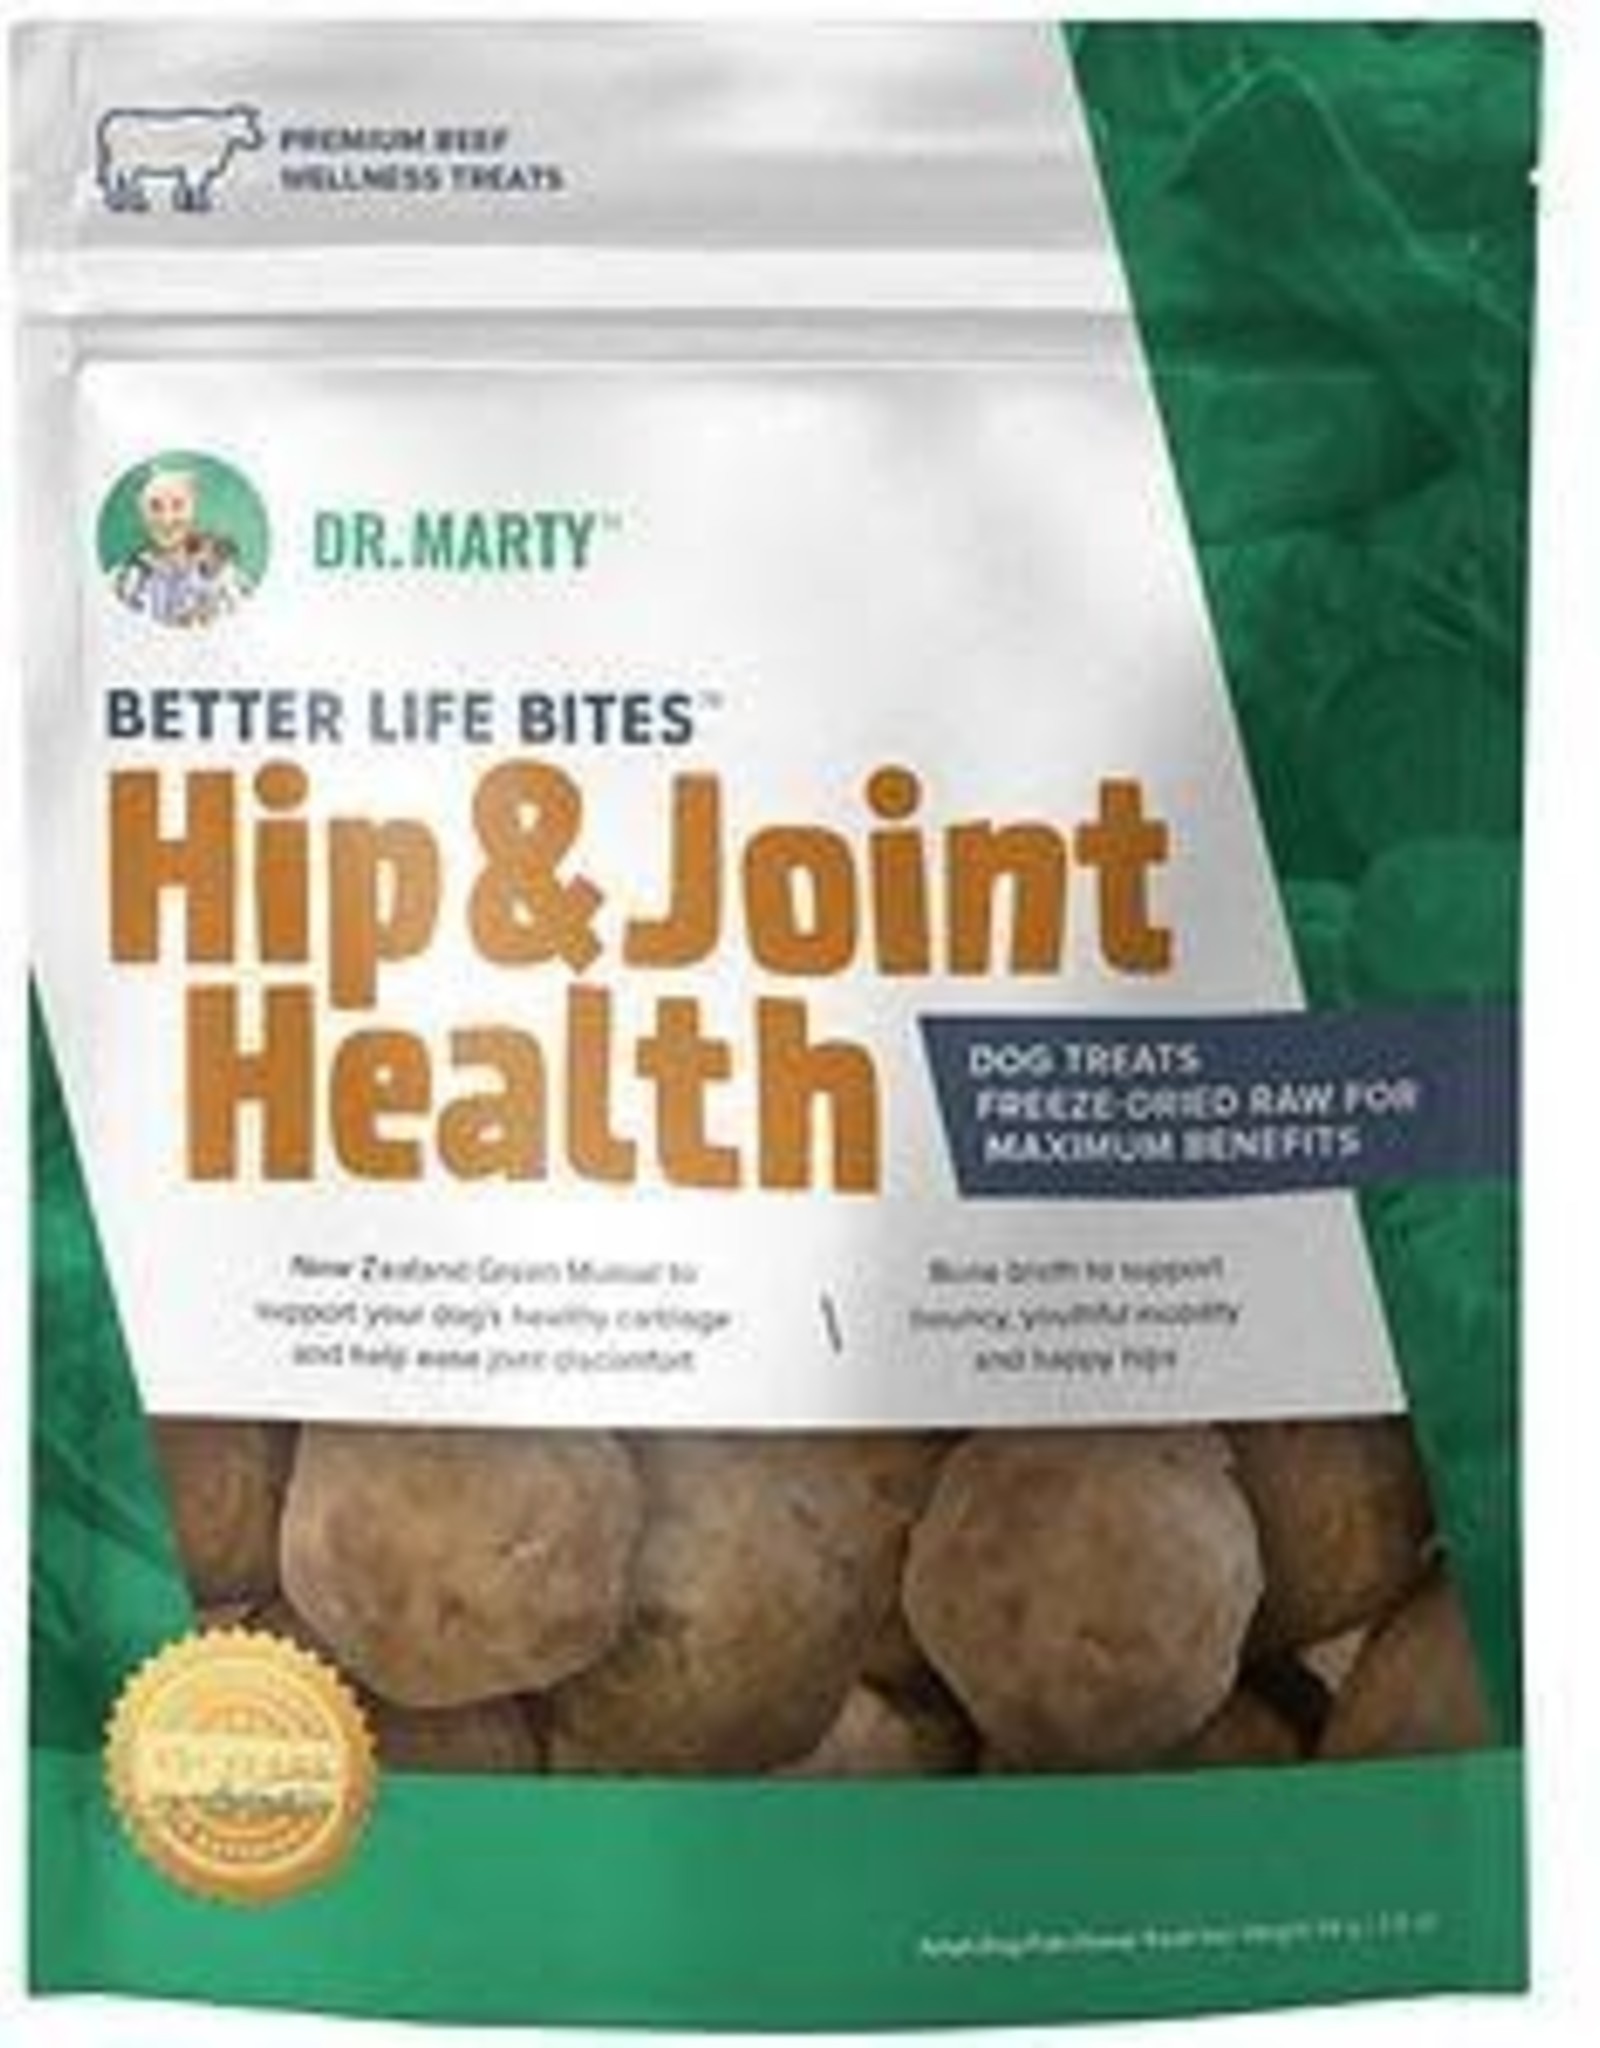 Dr. Marty Dr Marty Hip & Joint Health Bites